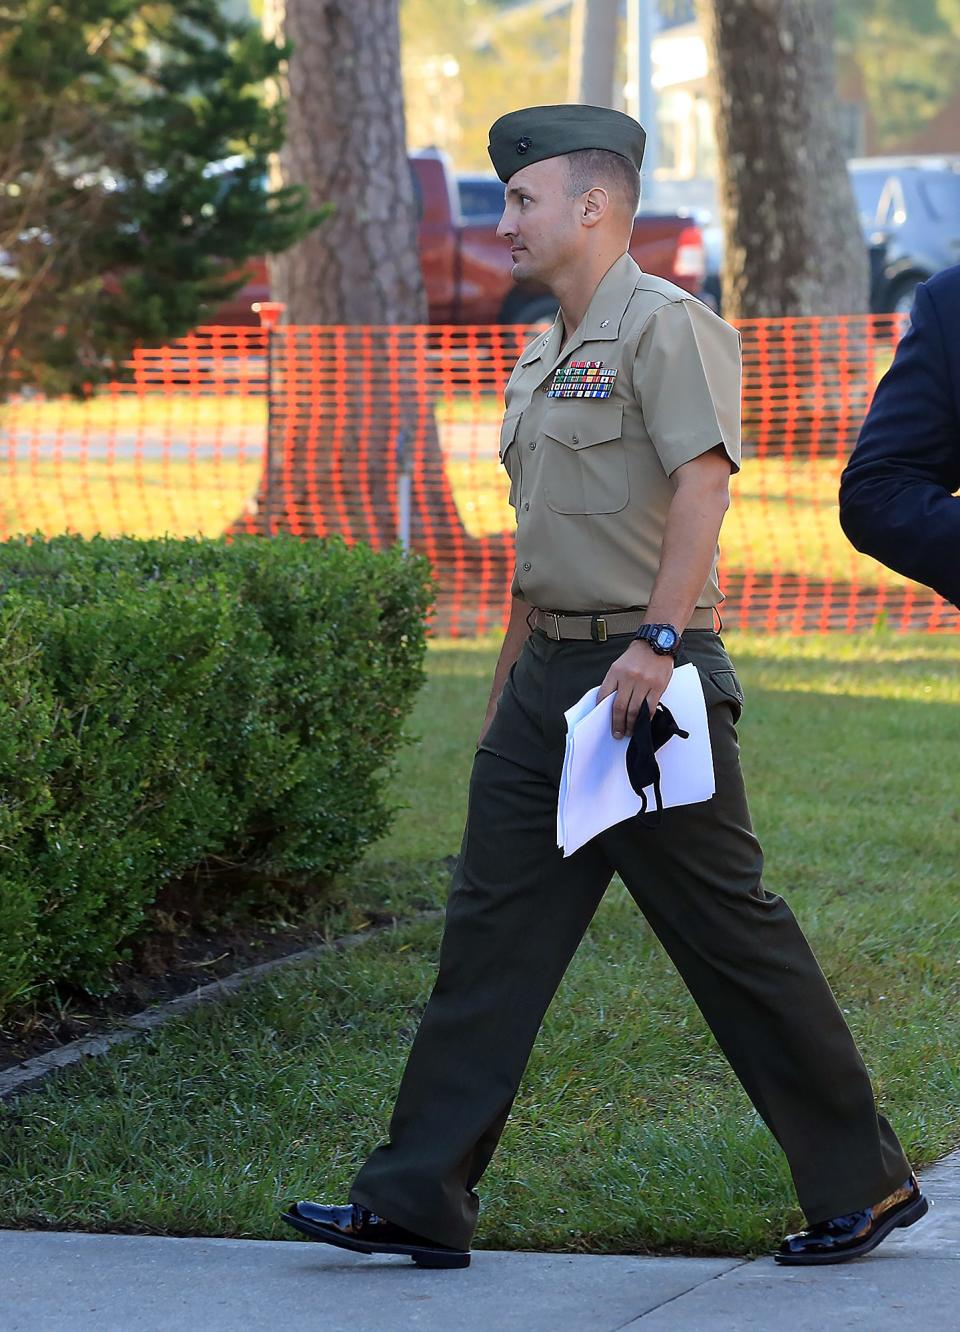 Lt. Col. Stuart Scheller Jr. walks to the courtroom on Camp Lejeune in Jacksonville NC on Thursday, Oct. 14, 2021. Scheller is being court-martialed after he publicly criticized the U.S. withdrawal from Afghanistan.